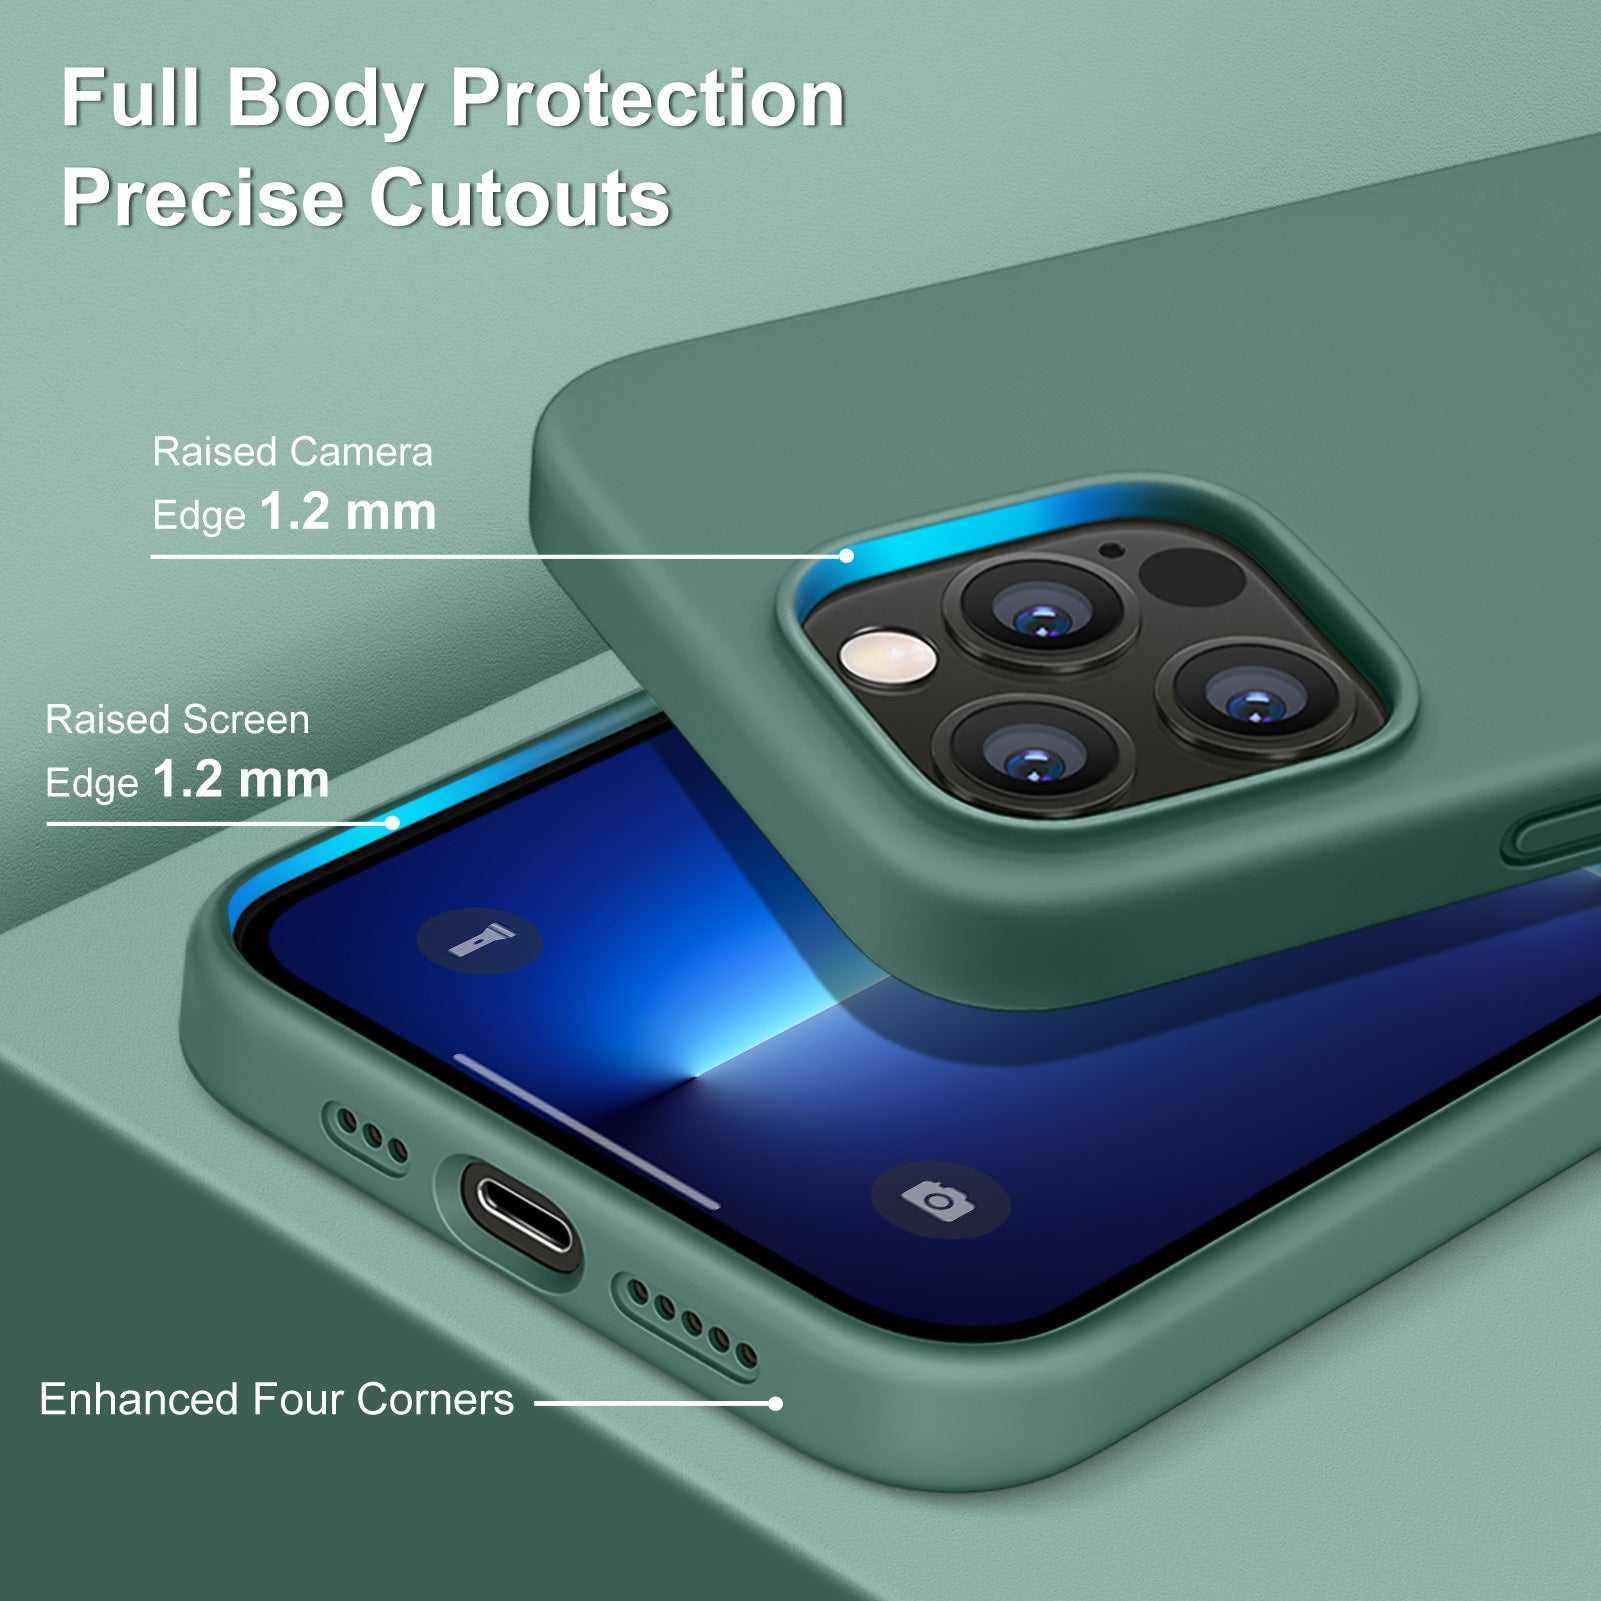 DTTO Compatible with iPhone 13 Pro Case, Ultra Slim Soft Premium Liquid Silicone [Military Grade Drop Protection] Full-Body Protective Bumper Phone Case for iPhone 13 Pro 6.1" (2021) - Lavender